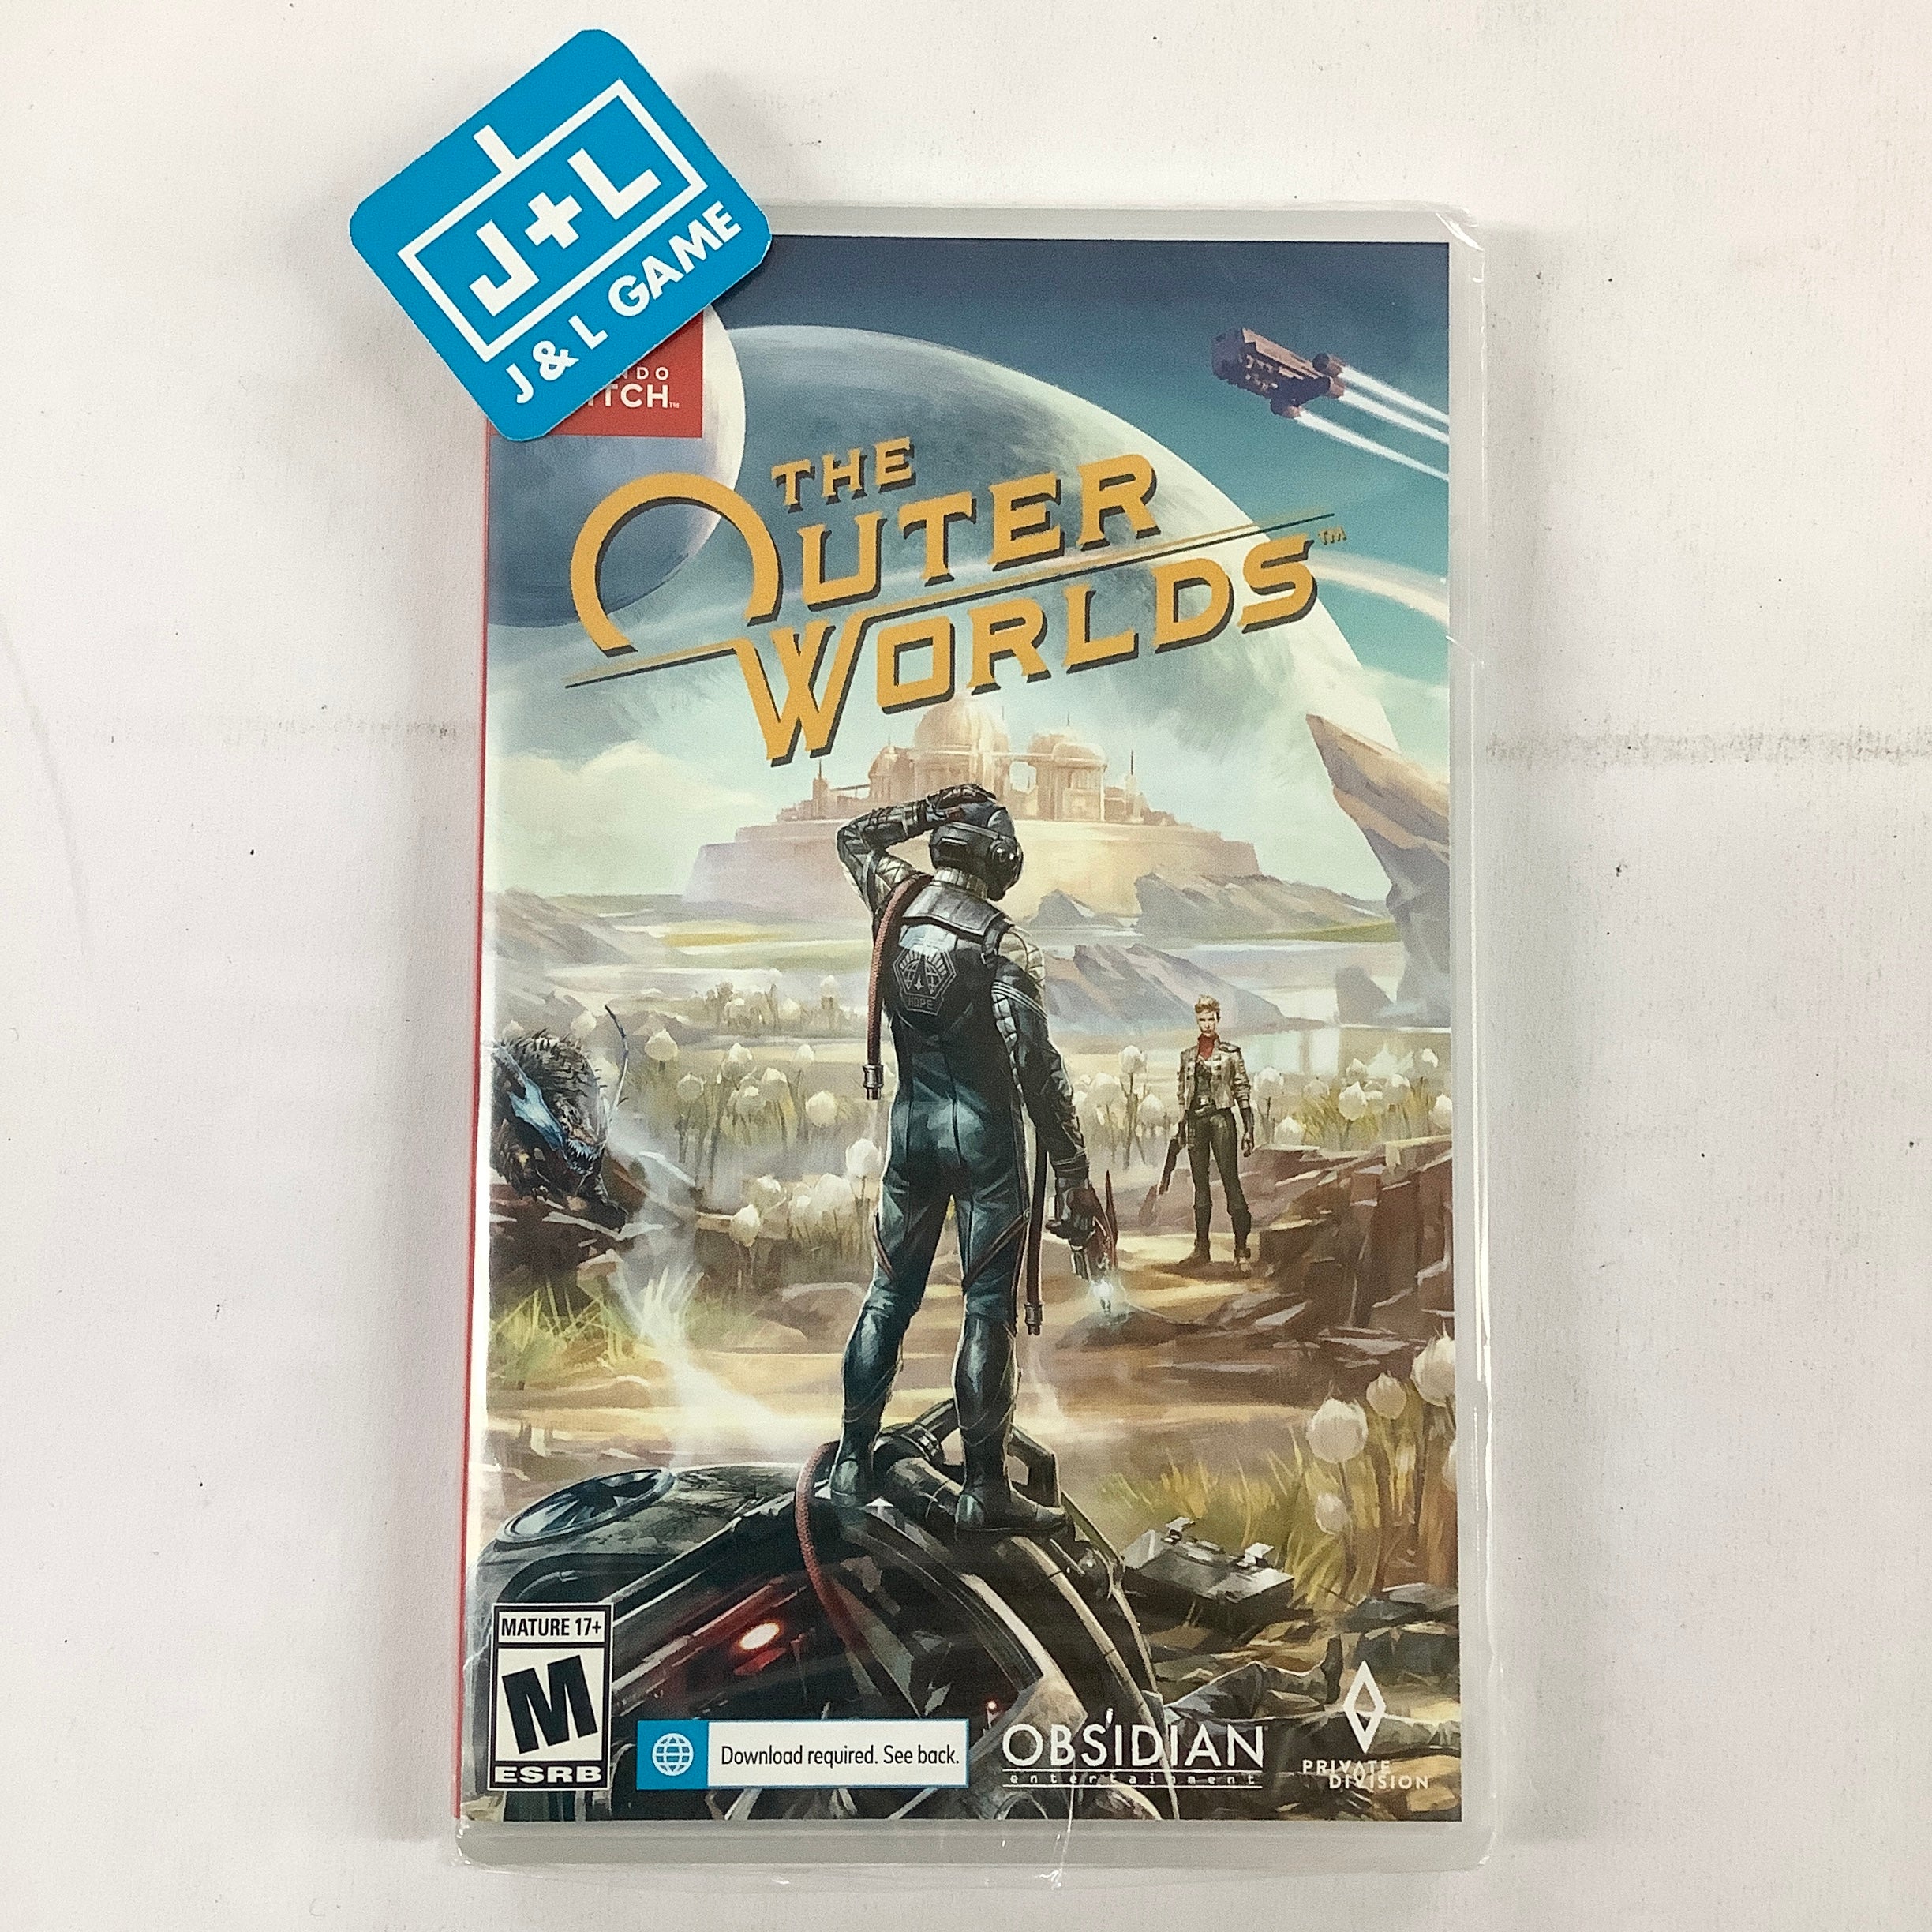 The Outer Worlds - (NSW) Nintendo Switch Video Games Private Division   